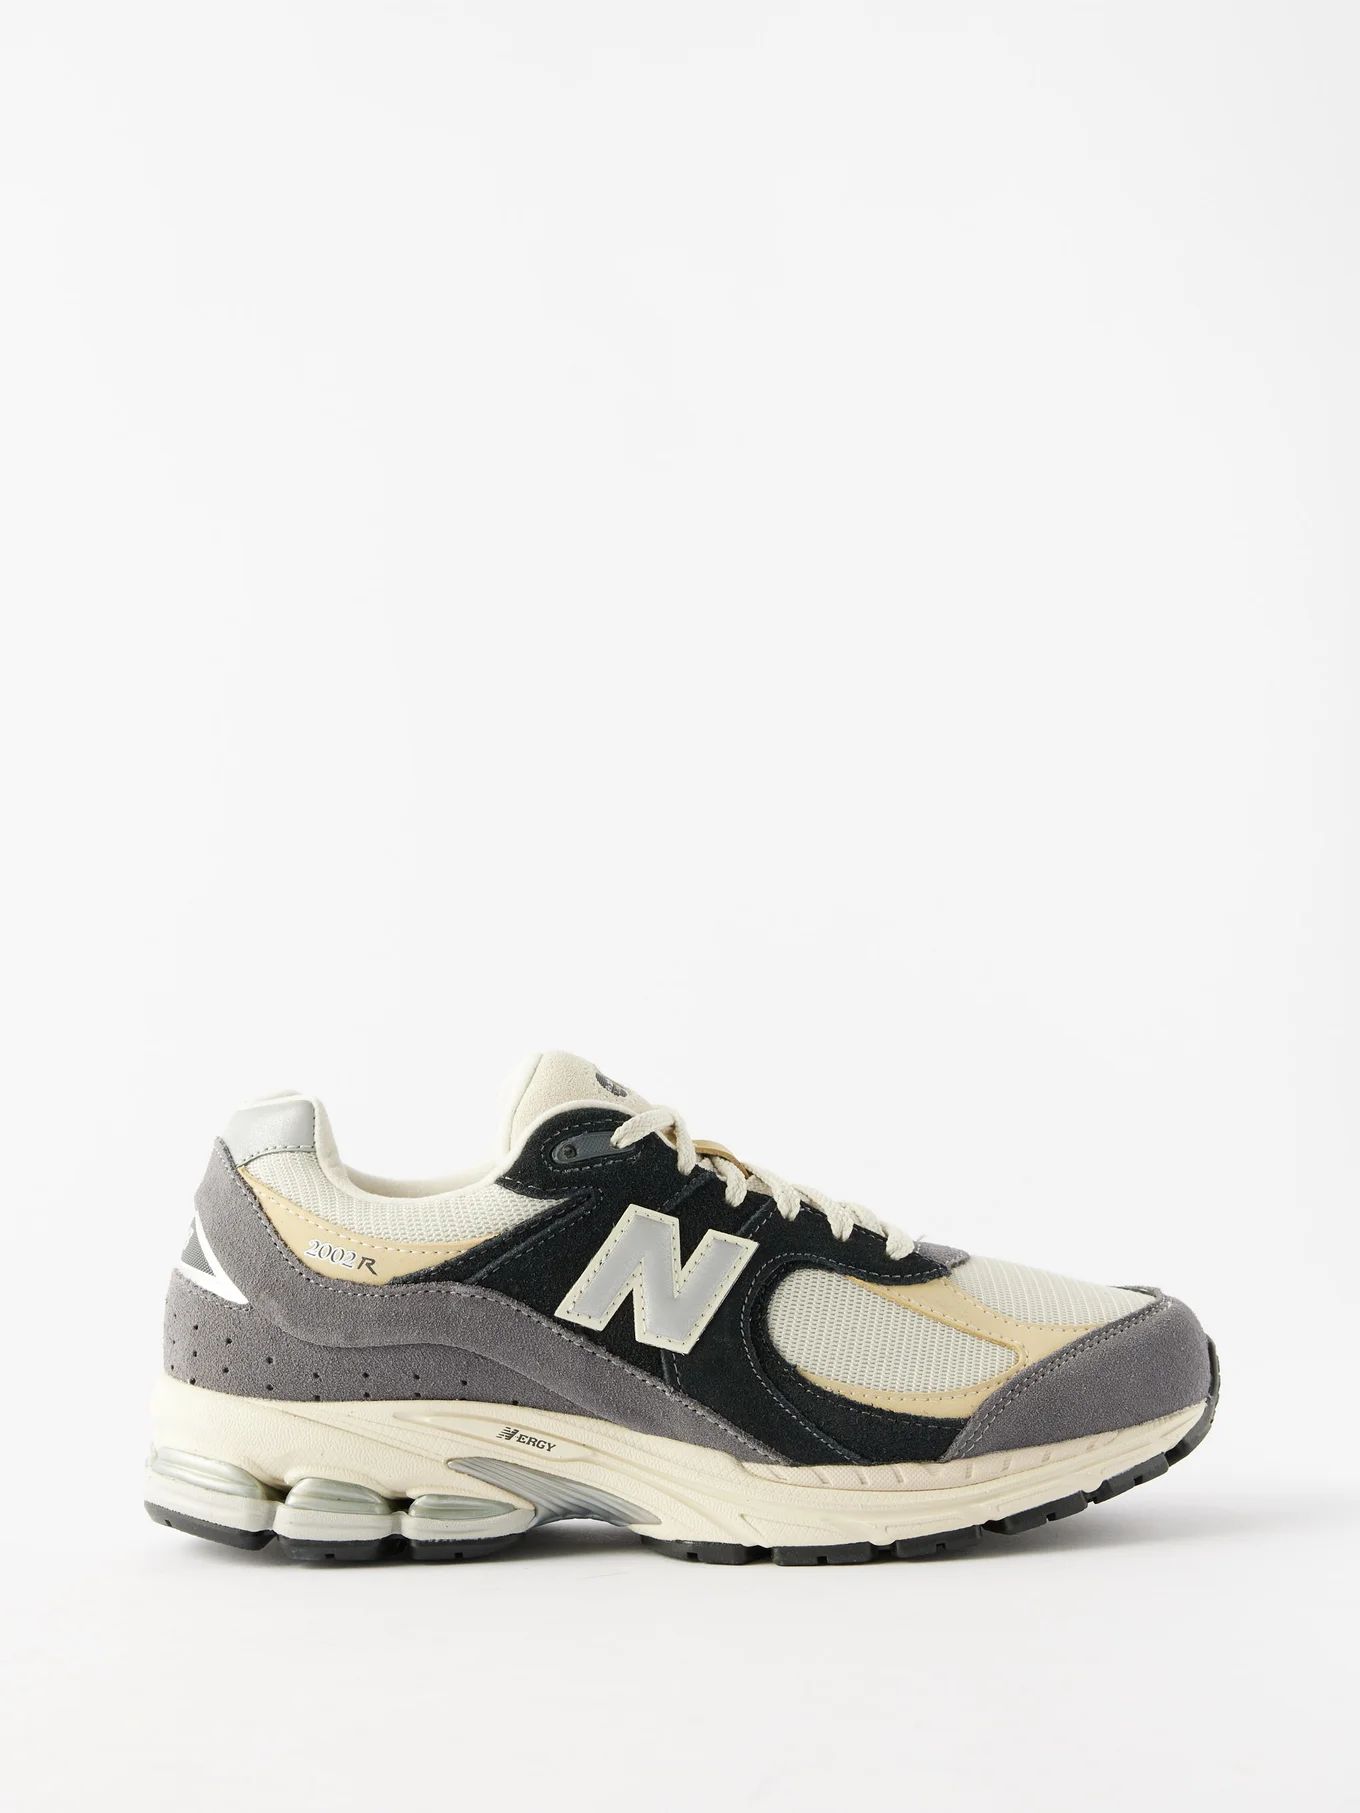 2002R suede and mesh trainers | New Balance | Matches (UK)